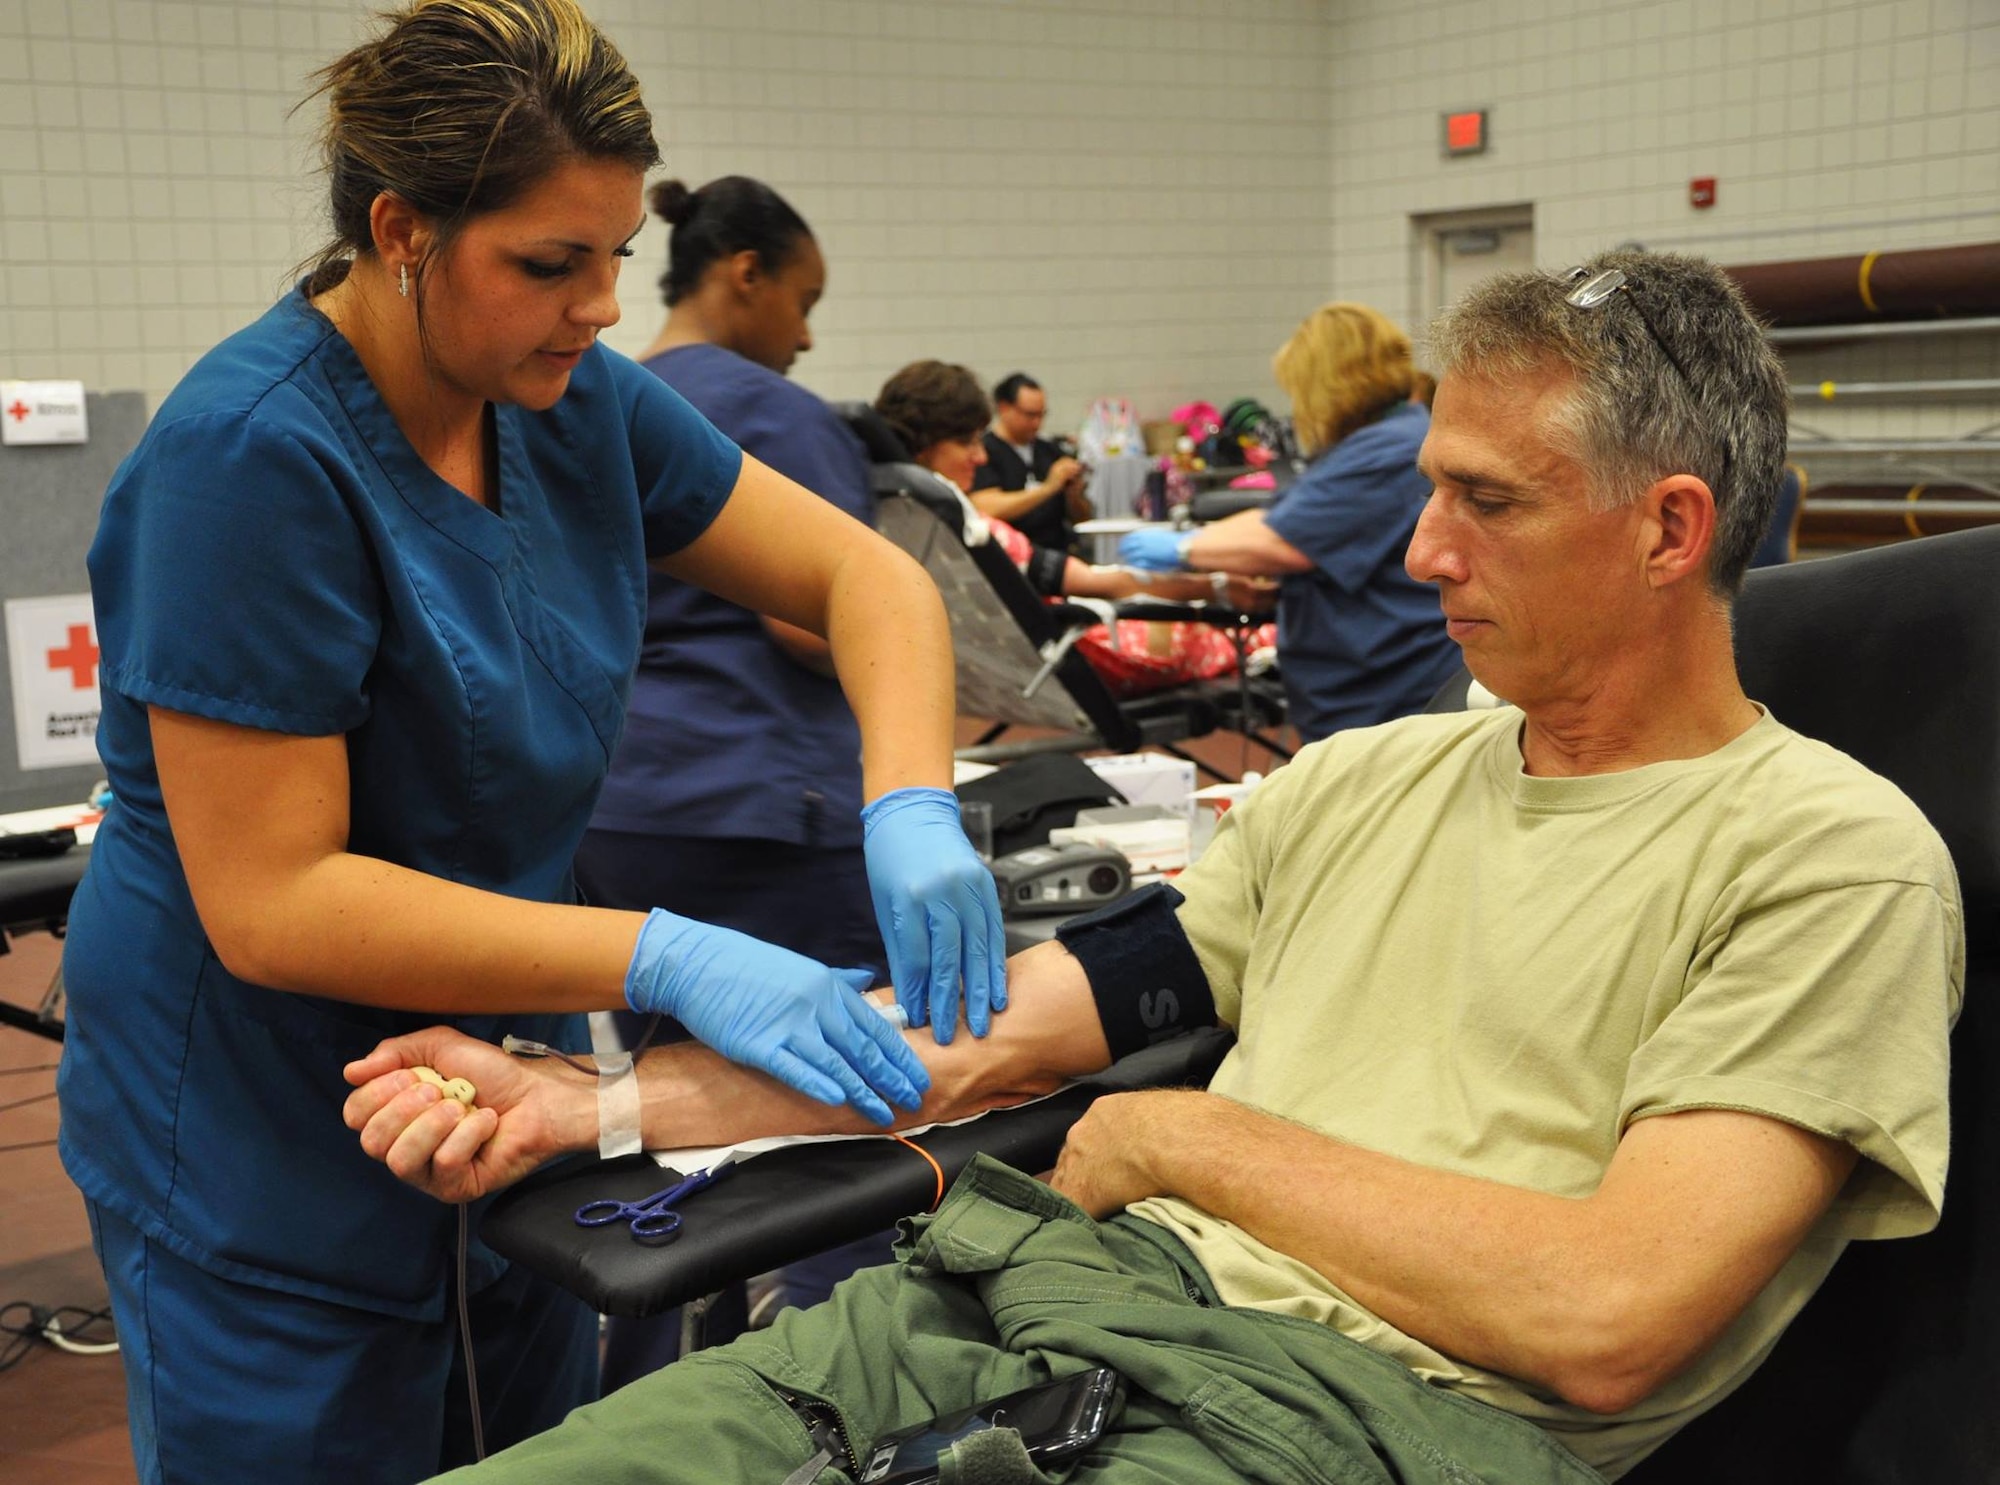 Amanda Fabry, American Red Cross phlebotomist, looks for a vein on Lt. Col. Randy Brink,18th Air Refueling Squadron pilot, during a blood drive May 14, 2015, at McConnell Air Force Base, Kan. Team McConnell is hosting the "Honor Your Hero" blood drive through May 15. For more information, or to register to give blood, check out this story at www.mcconnell.af.mil/news/story.asp?id=123447862, or call 1-800-RED CROSS.  (U.S. Air Force Photo by Tech. Sgt. Abigail Klein)
